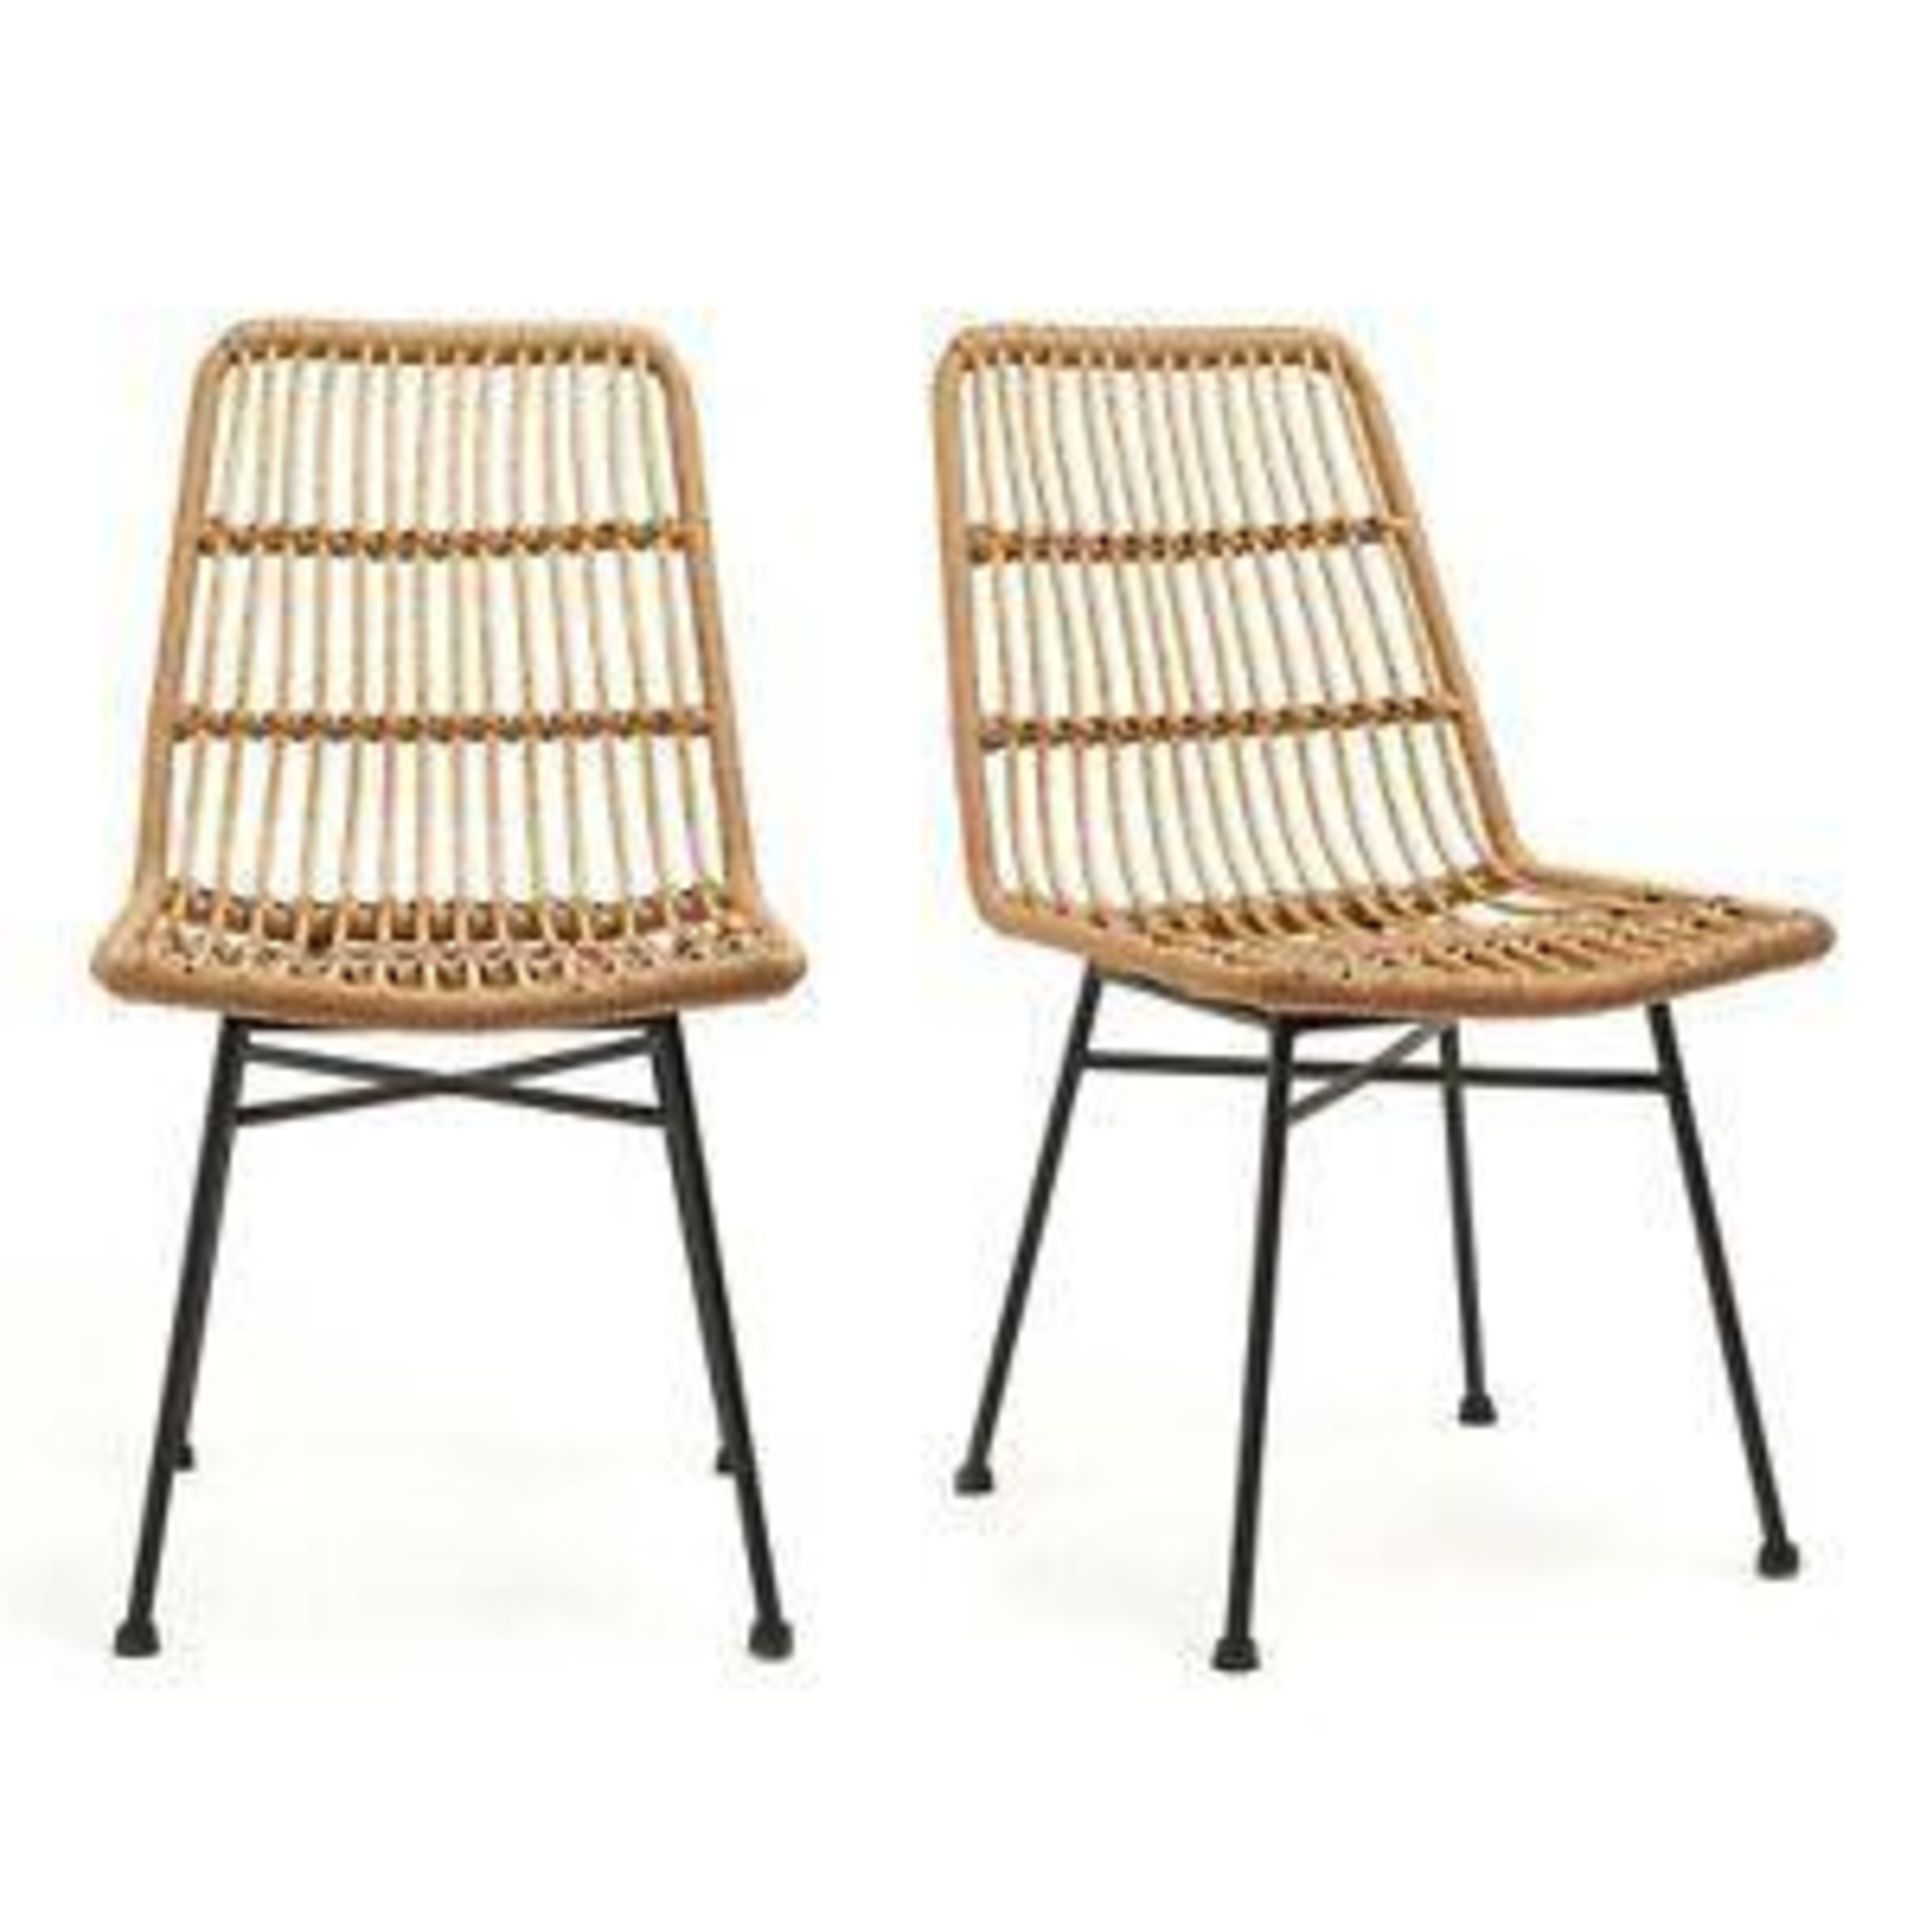 Dining Chairs Set Of 2 (ER35) Product information Explore Spinningfield, our new furniture range